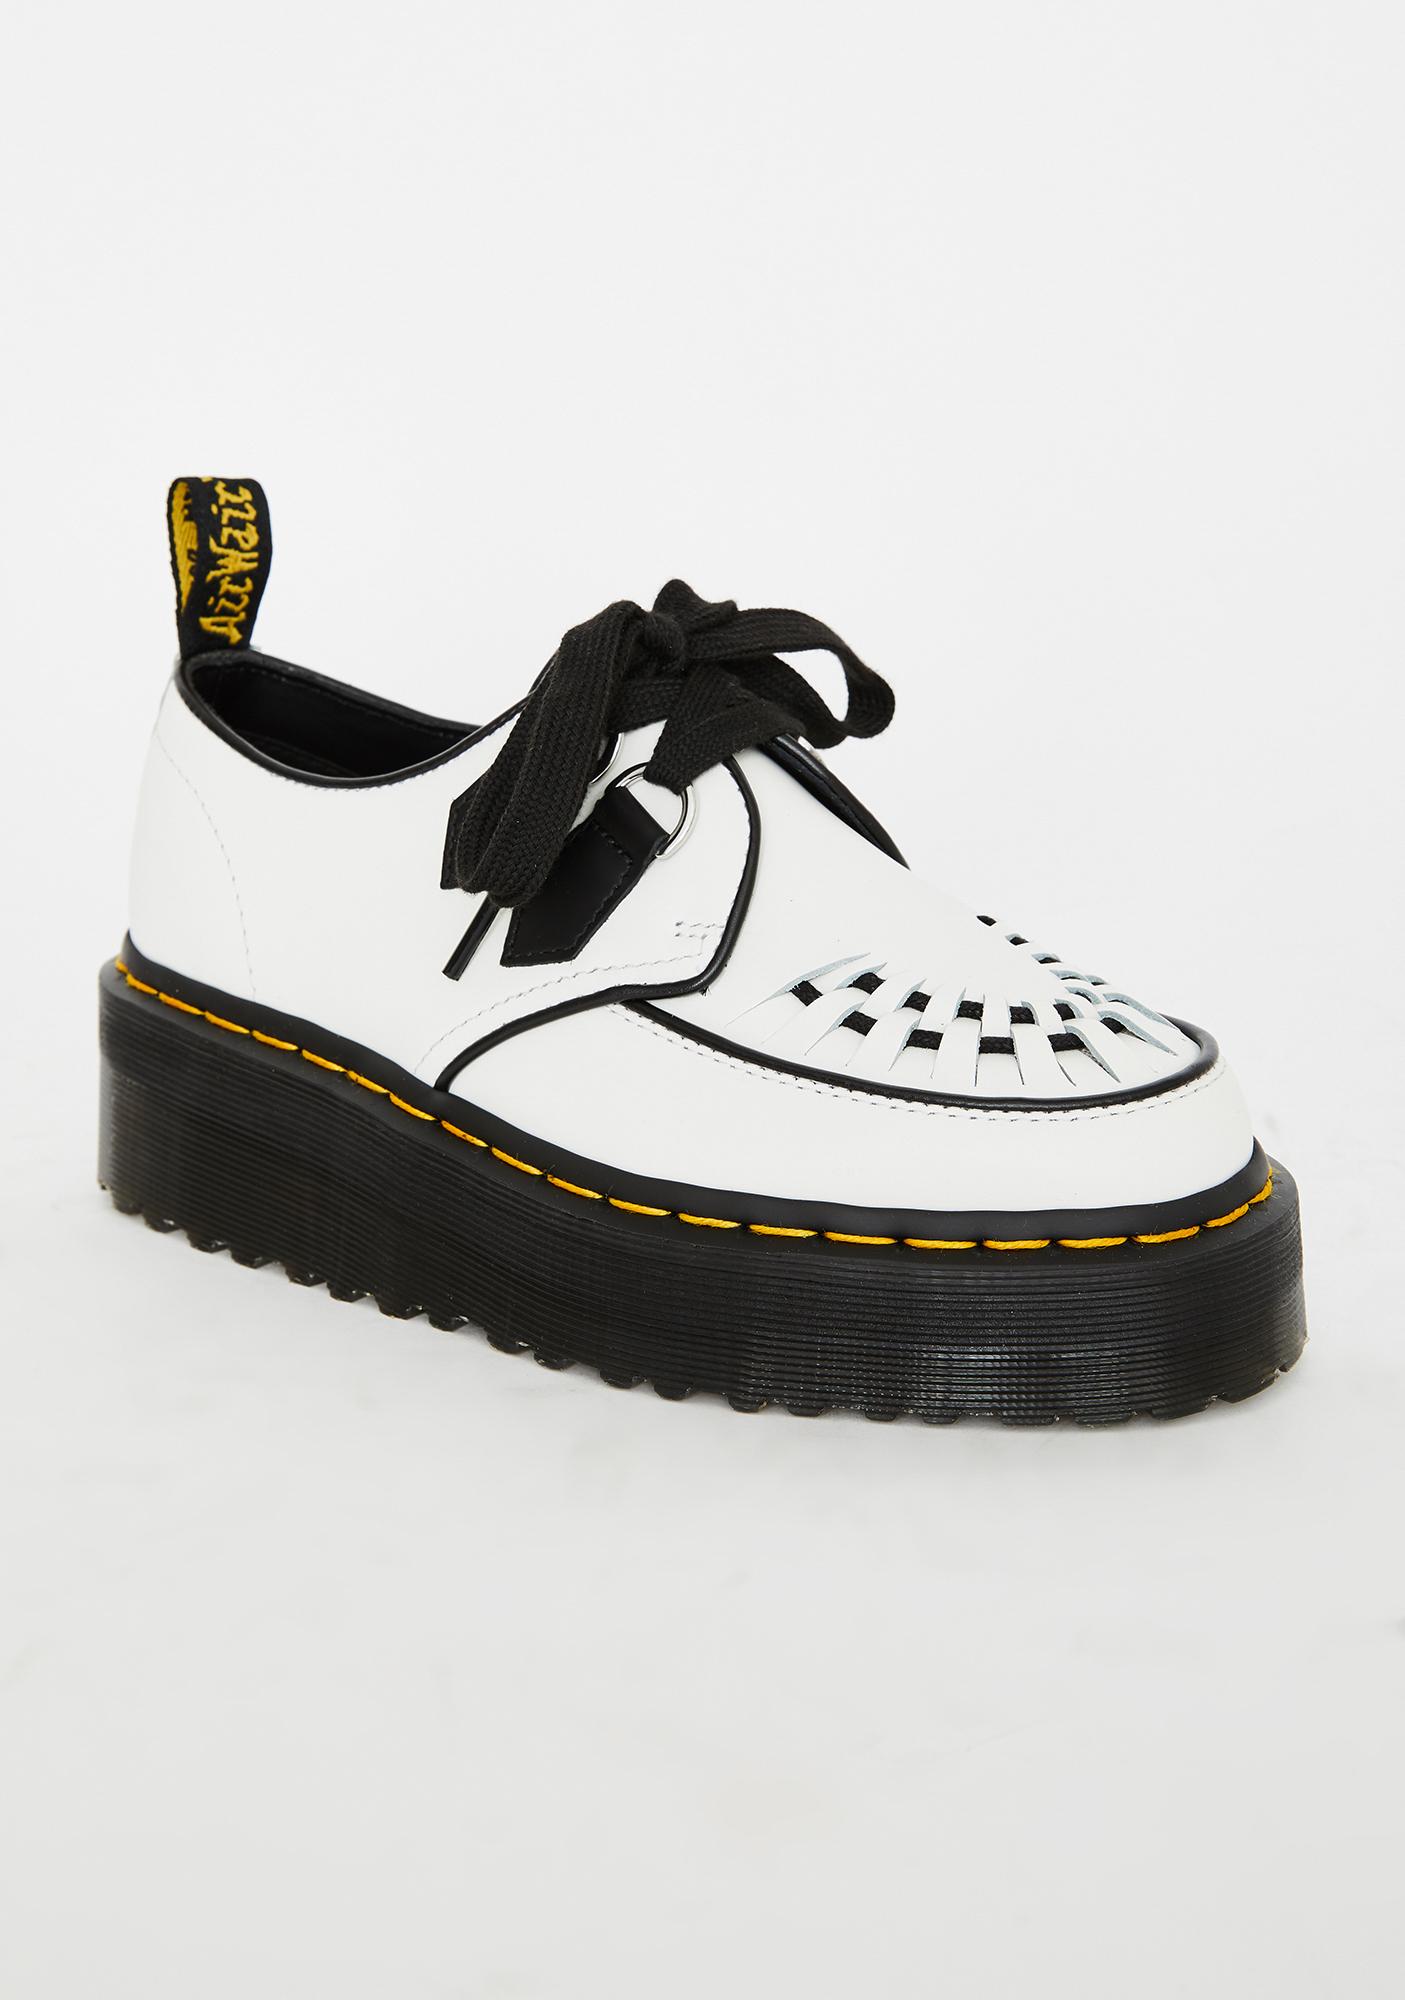 creepers shoes doc martens